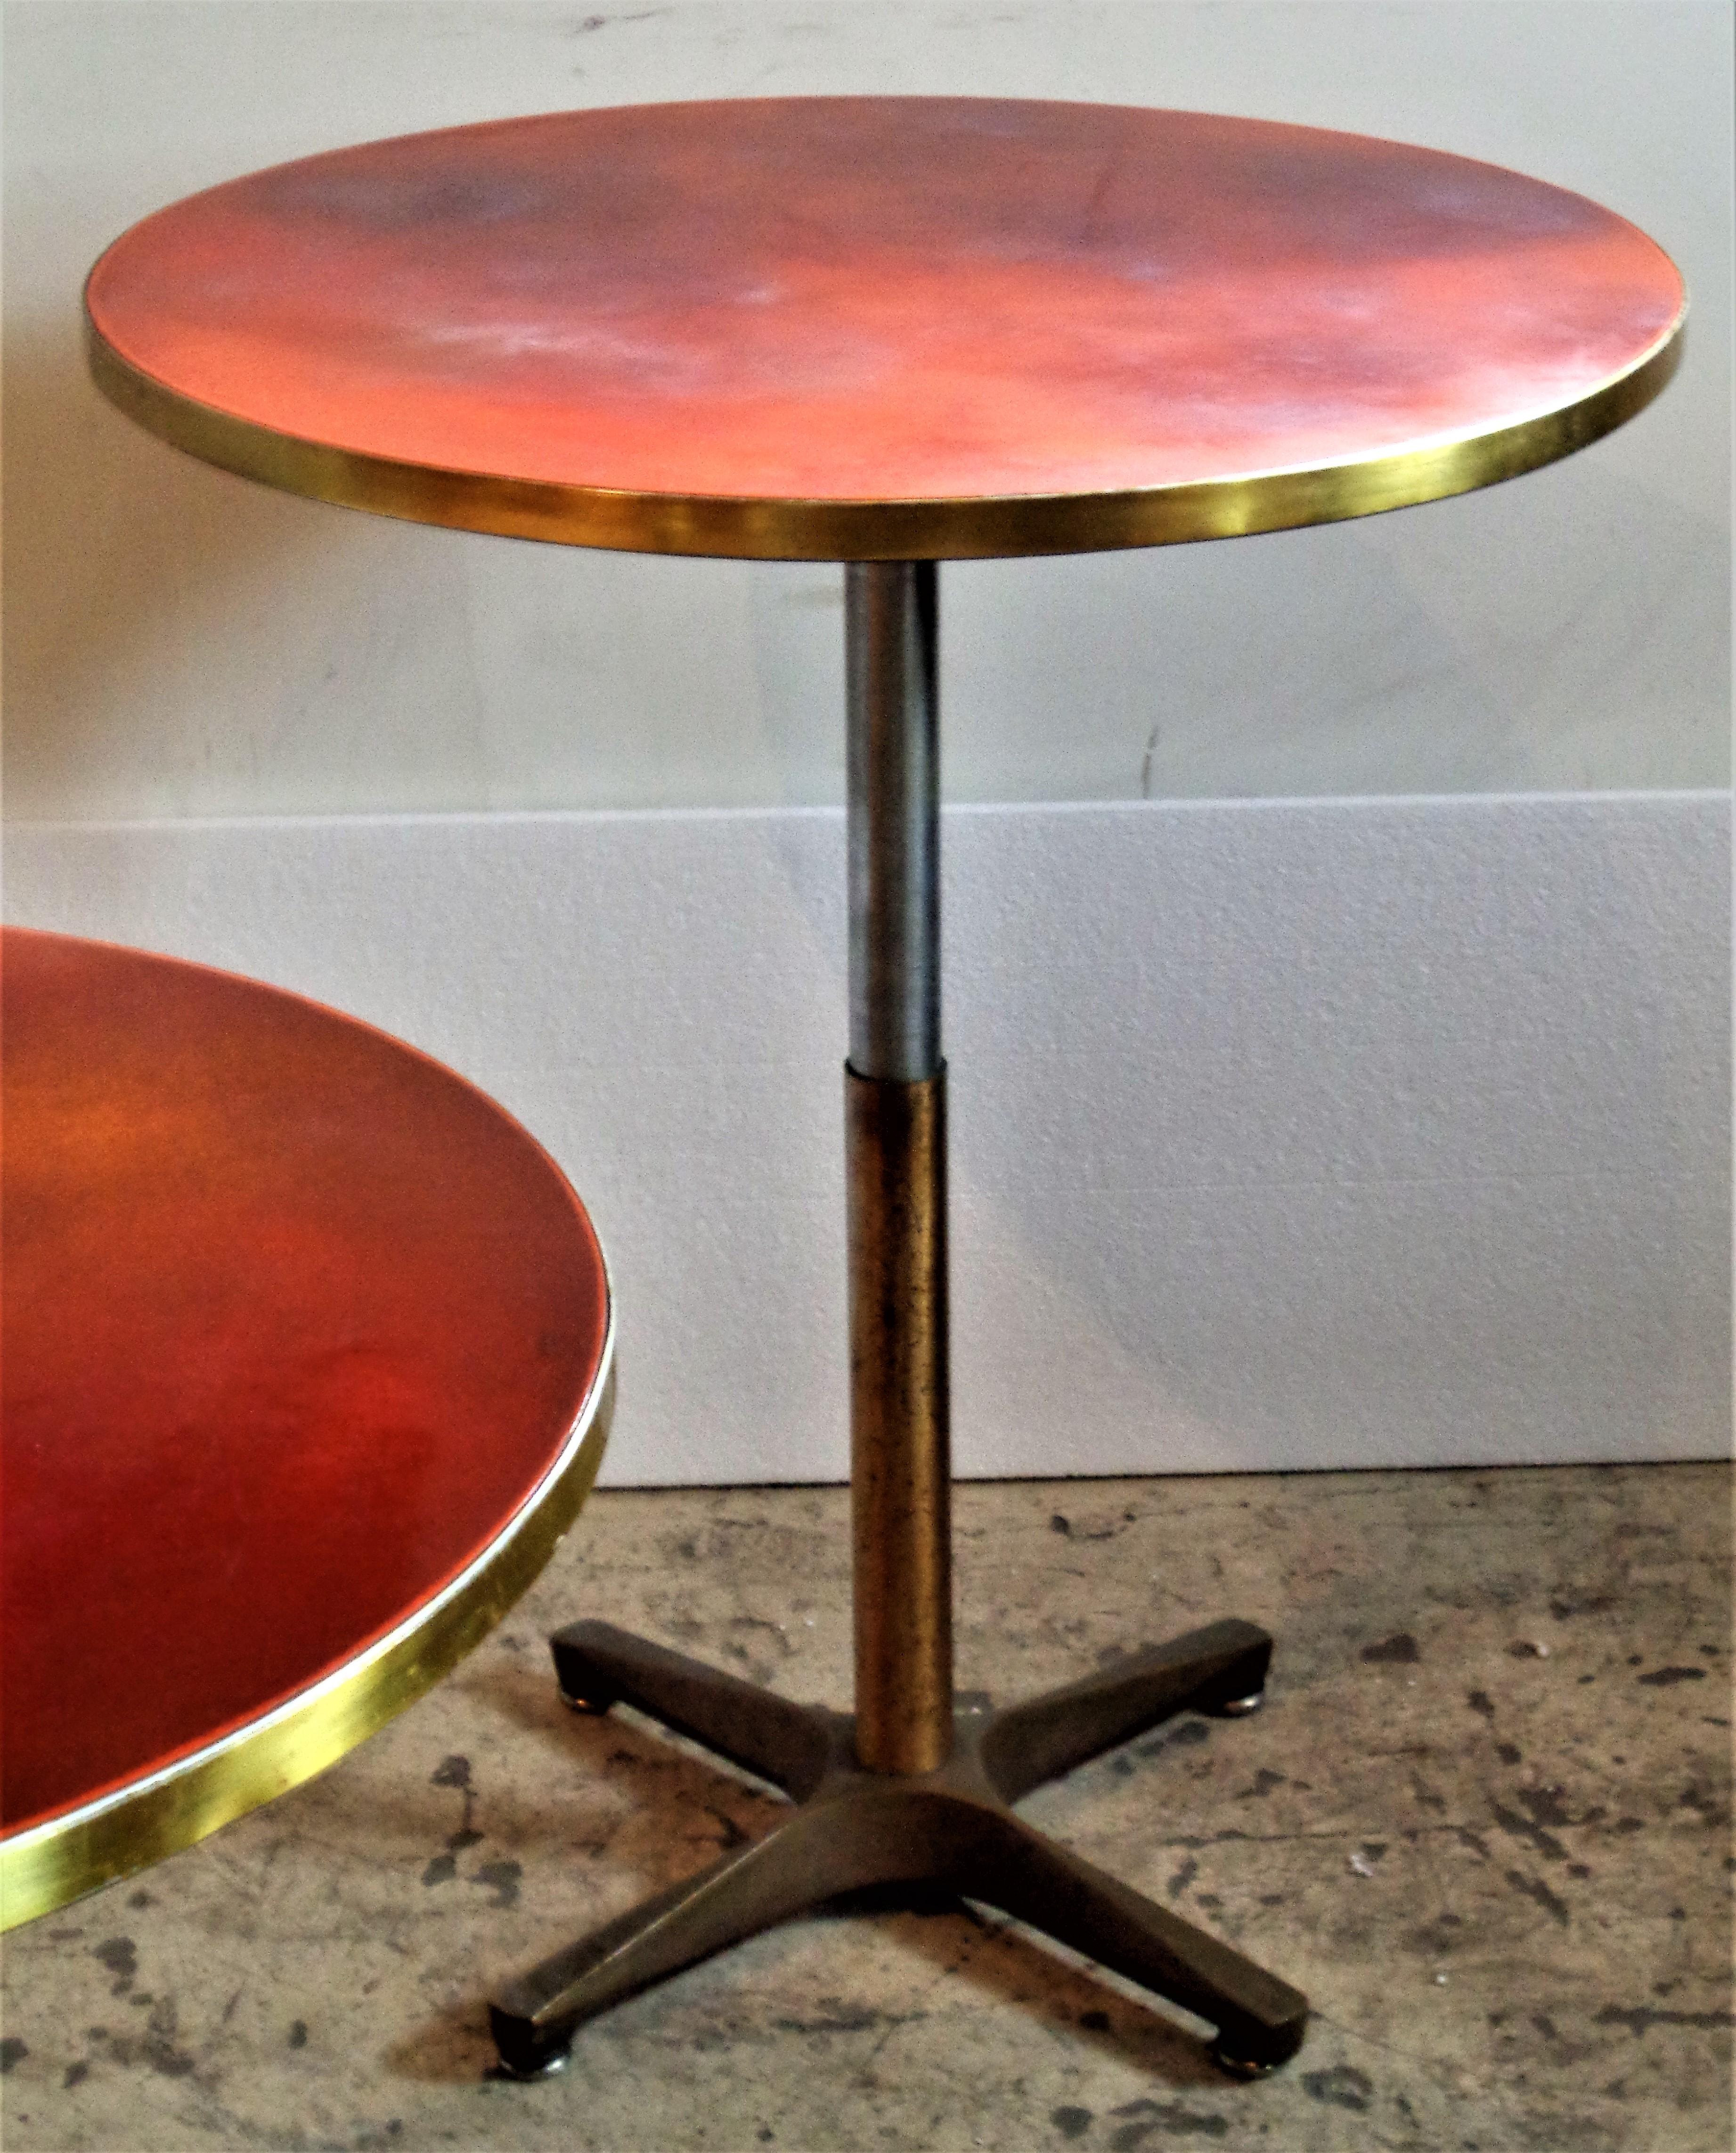 Bronze Base Enamel Top Adjustable Height Tables, 1940-1950 / ONE TABLE IS SOLD  5